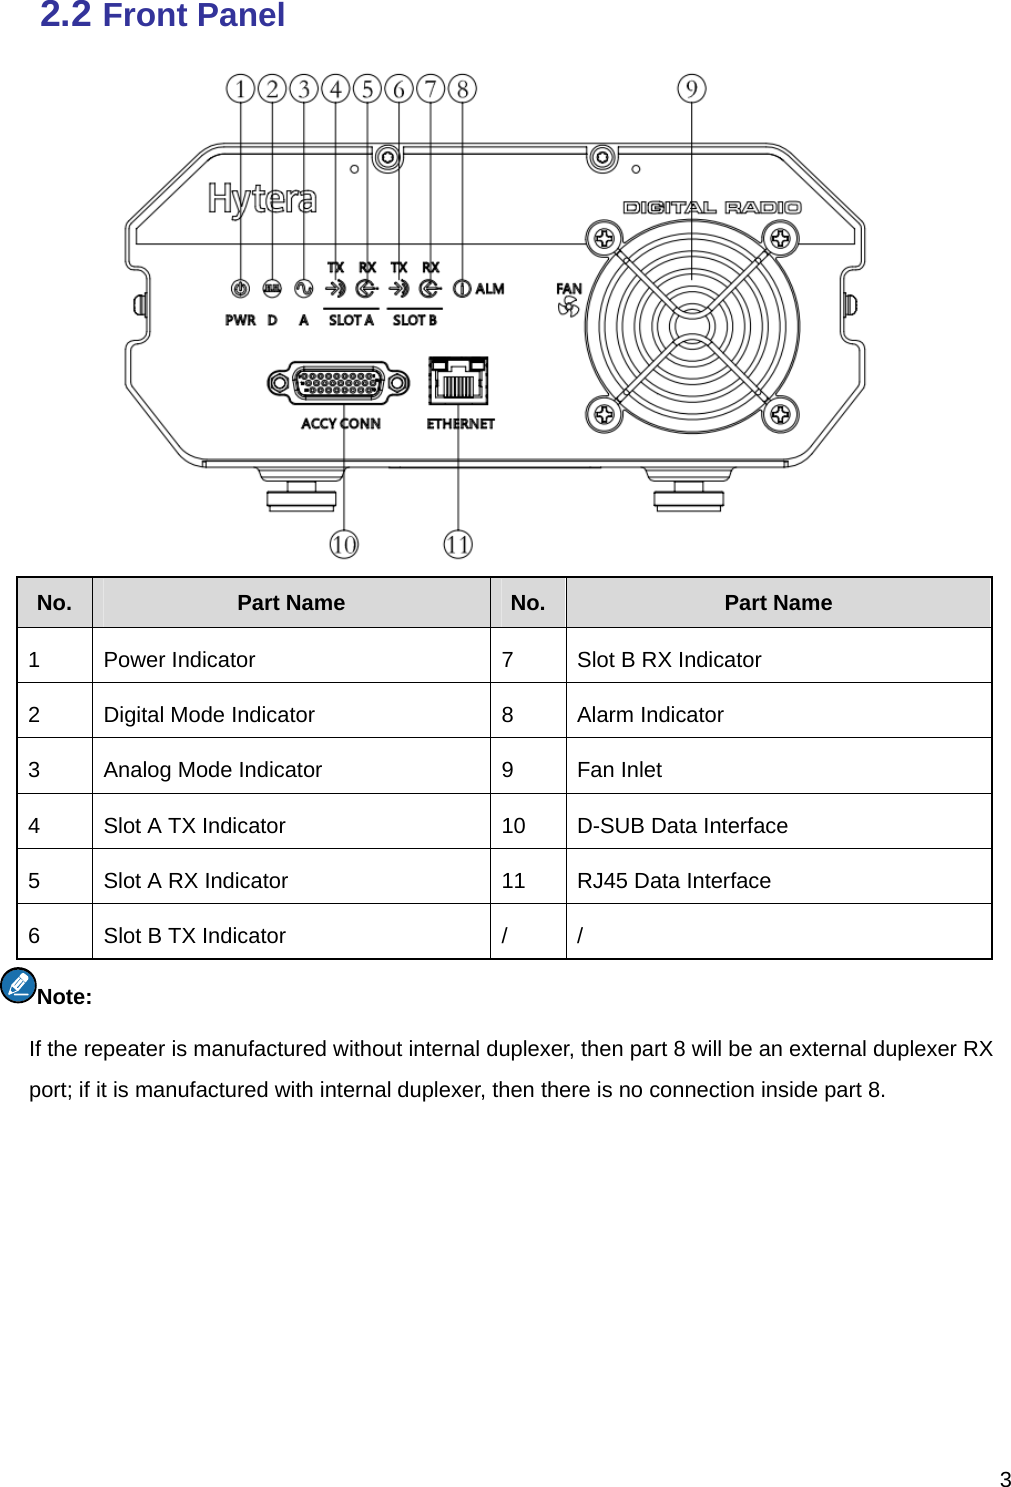   32.2 Front Panel    No.  Part Name  No.  Part Name 1  Power Indicator  7  Slot B RX Indicator 2  Digital Mode Indicator  8  Alarm Indicator 3  Analog Mode Indicator  9  Fan Inlet 4  Slot A TX Indicator  10  D-SUB Data Interface 5  Slot A RX Indicator  11  RJ45 Data Interface 6  Slot B TX Indicator  /  / Note:   If the repeater is manufactured without internal duplexer, then part 8 will be an external duplexer RX port; if it is manufactured with internal duplexer, then there is no connection inside part 8. 